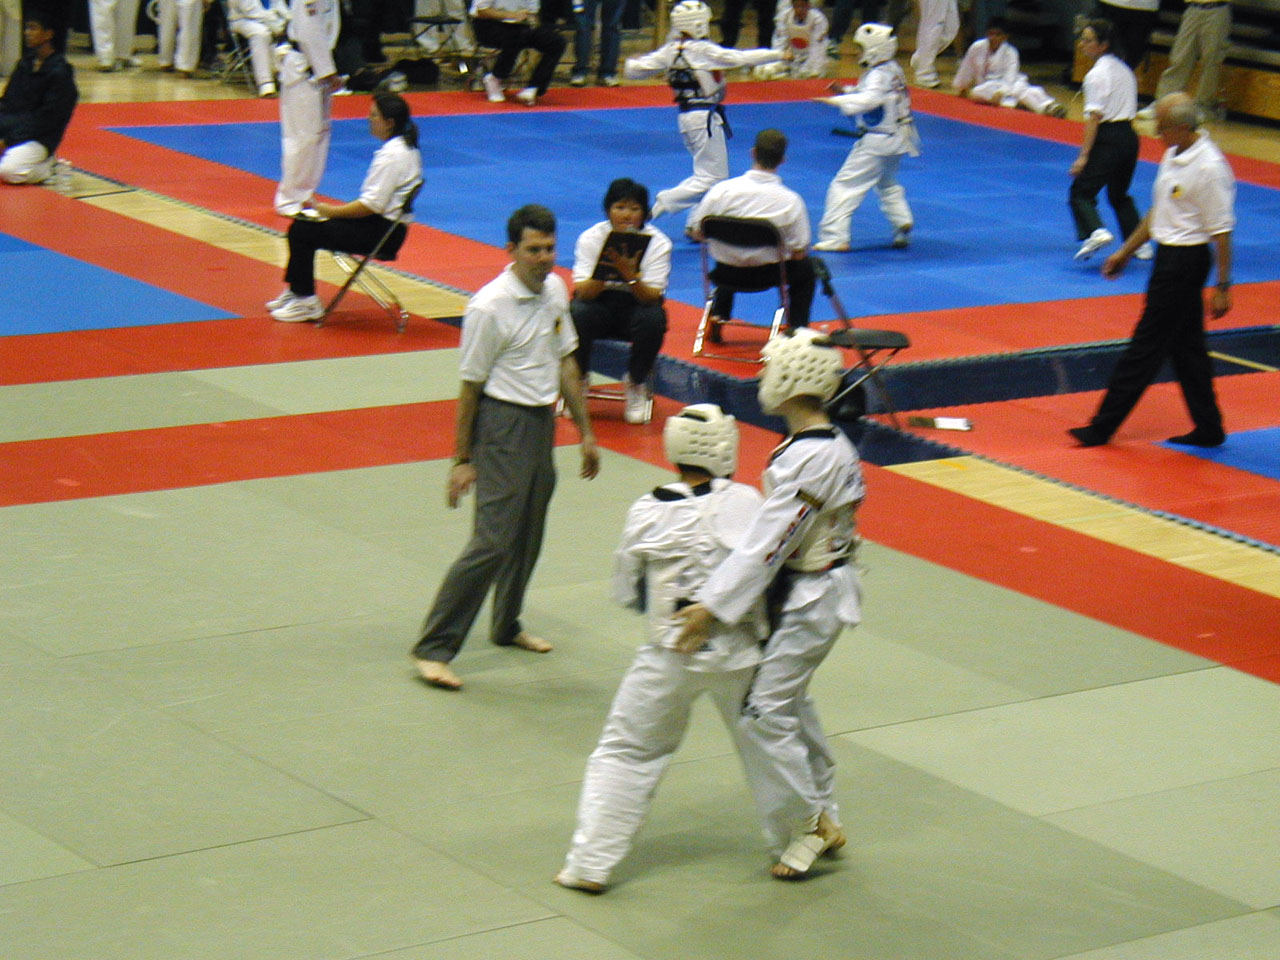 005_Sparring